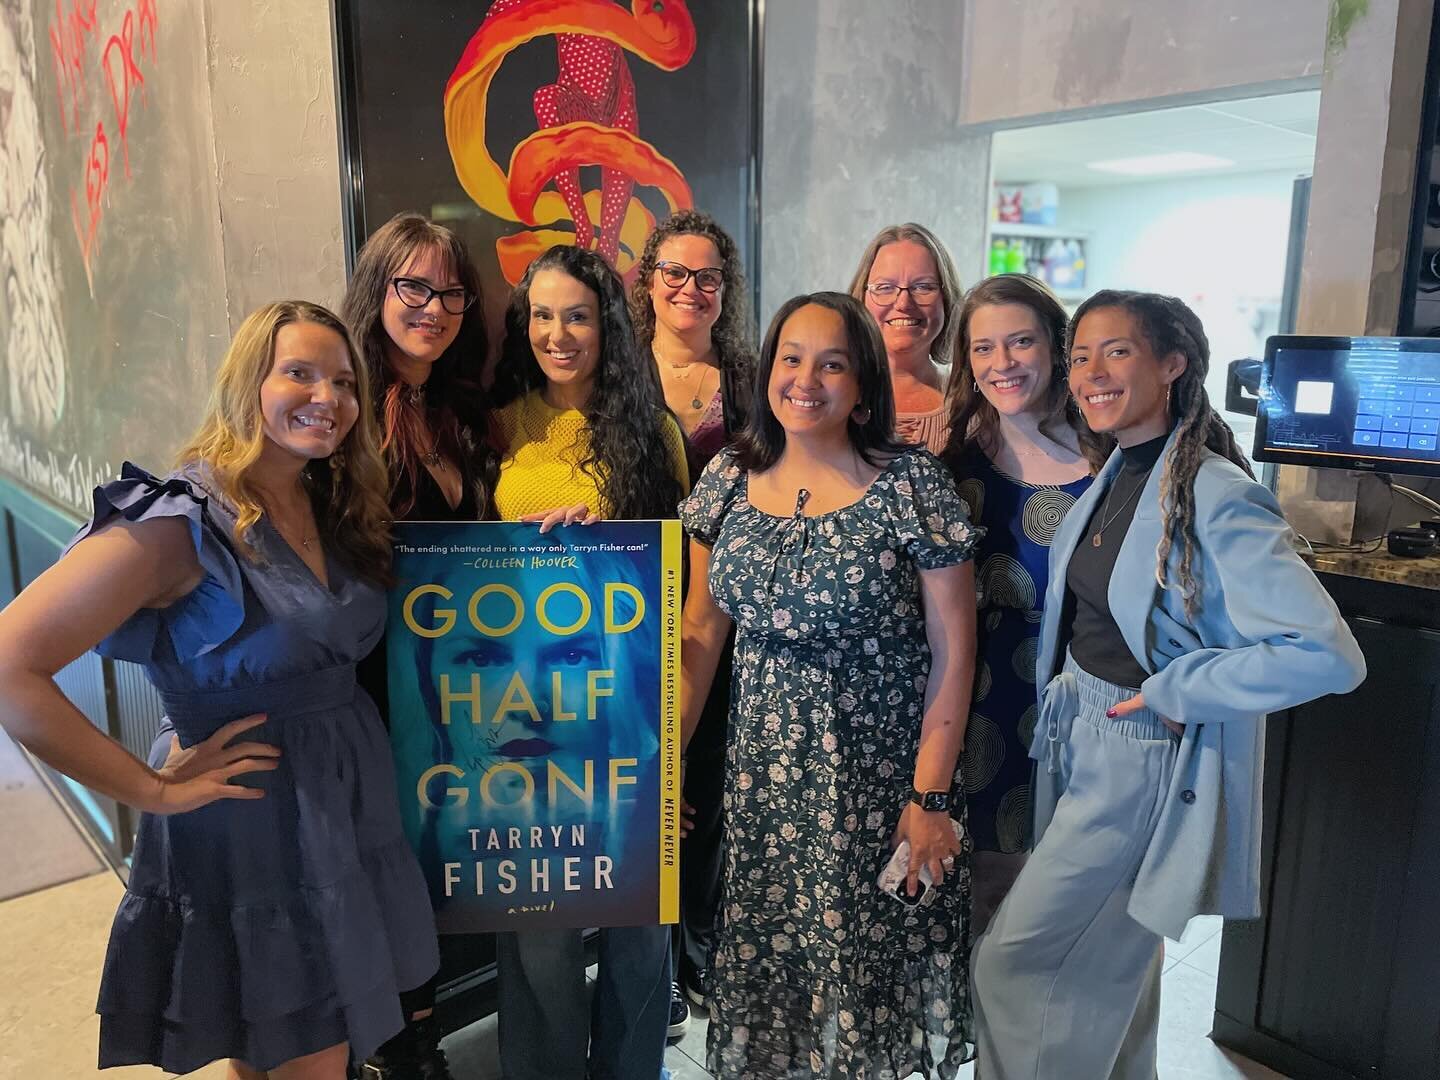 We&rsquo;ve had a busy Easter Week with lots of Spring Break shoppers ! Excuse the delay in our posts 😊

Last week we had a wonderful time with NY Times Bestselling Author Tarryn Fisher! We had so much fun hearing about her brand new thriller GOOD H